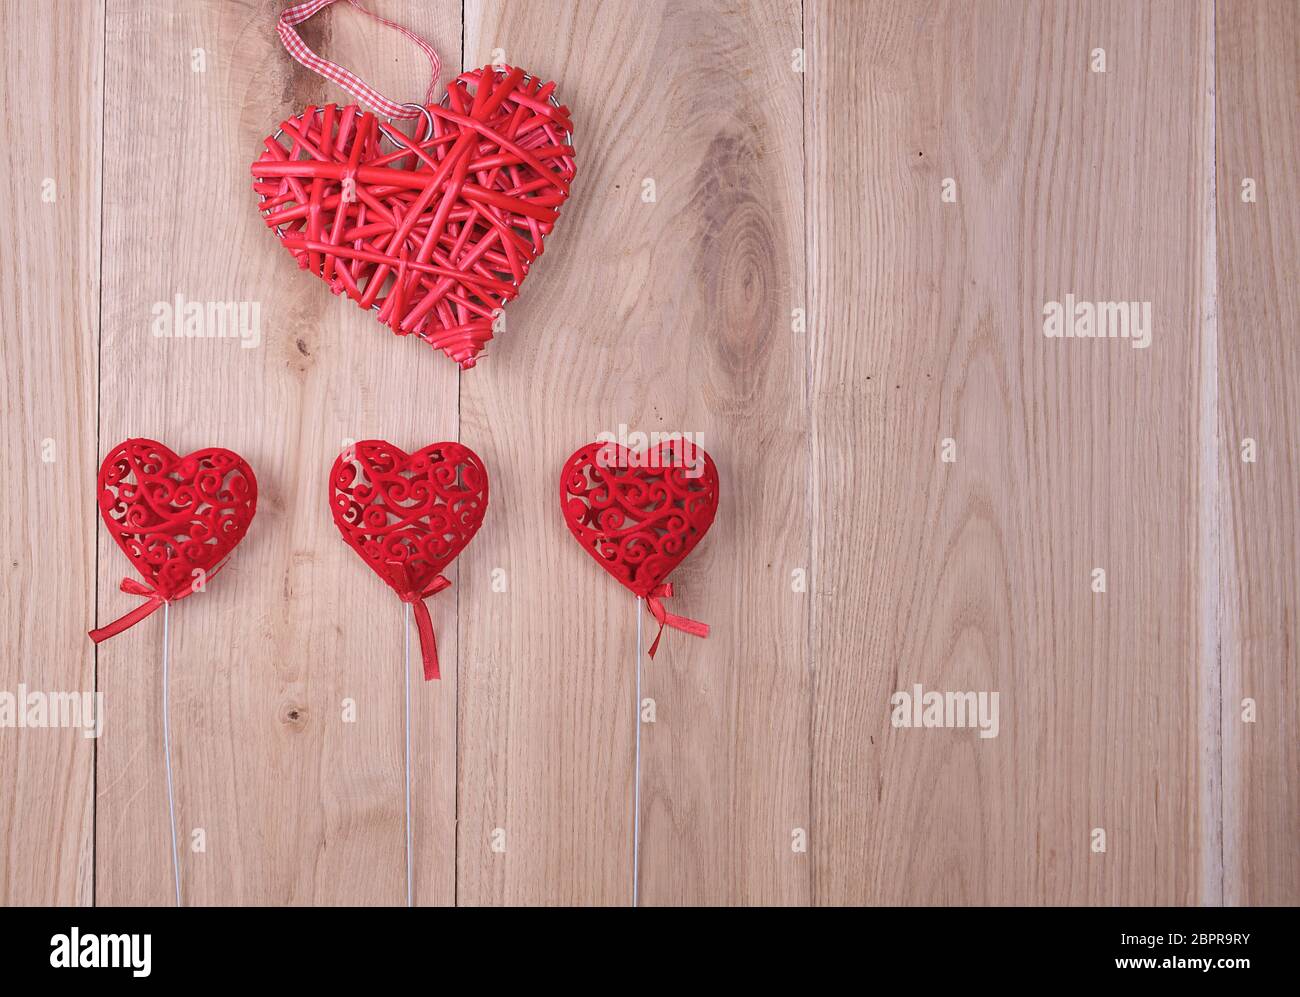 red hearts on a wooden background of oak boards, copy space Stock Photo